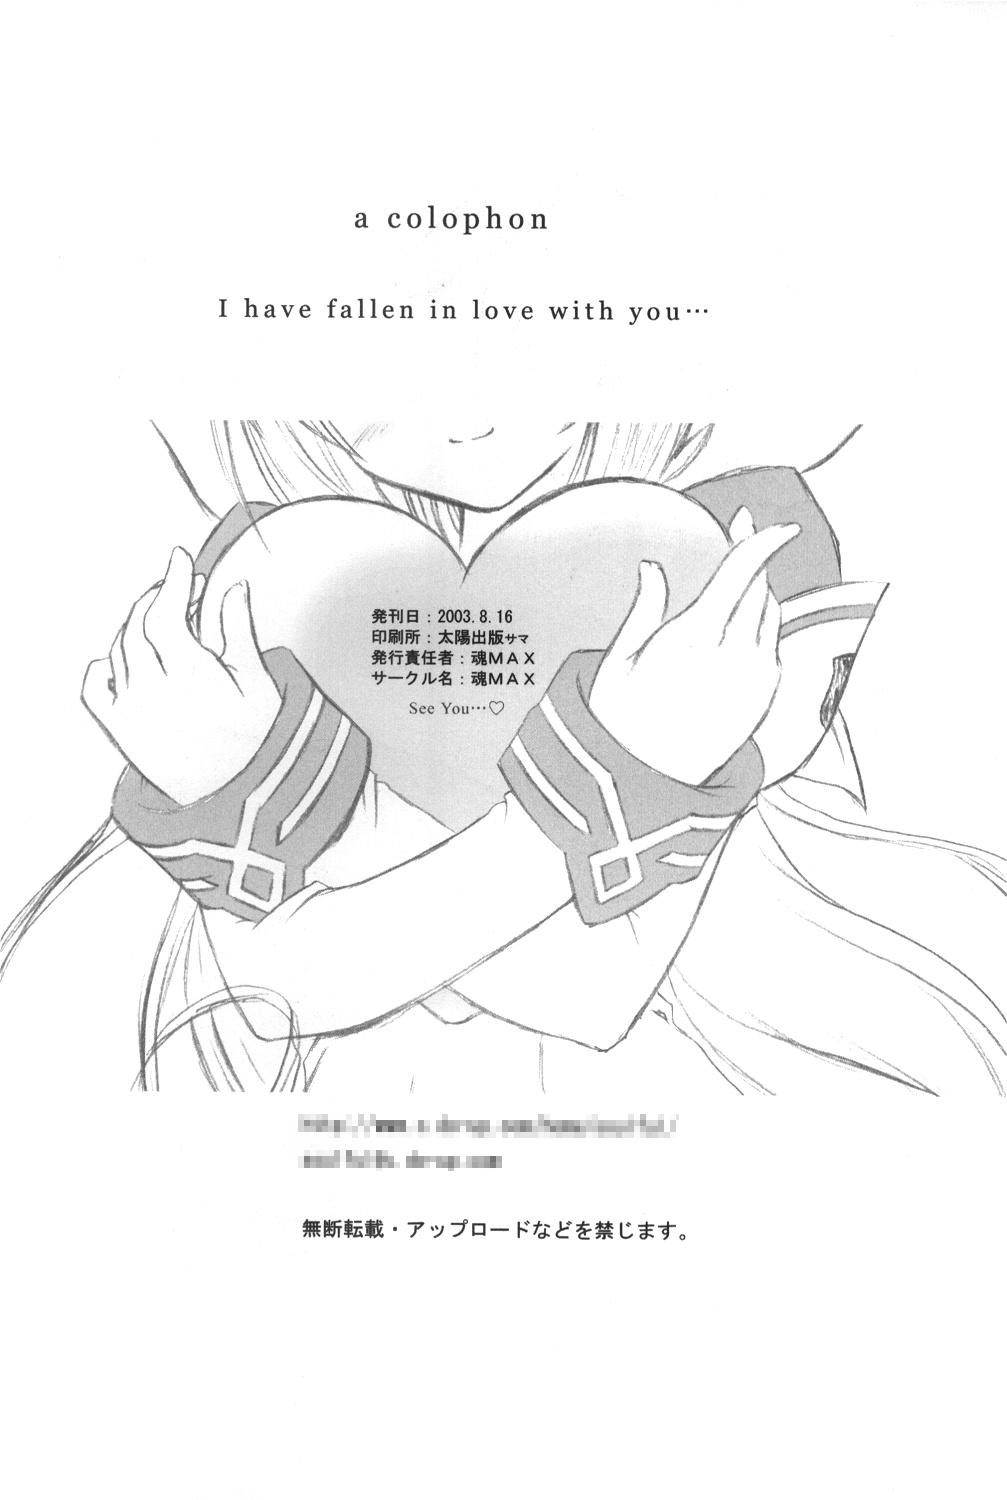 Backshots I have fallen in love with you... - Muv-luv Romance - Page 25